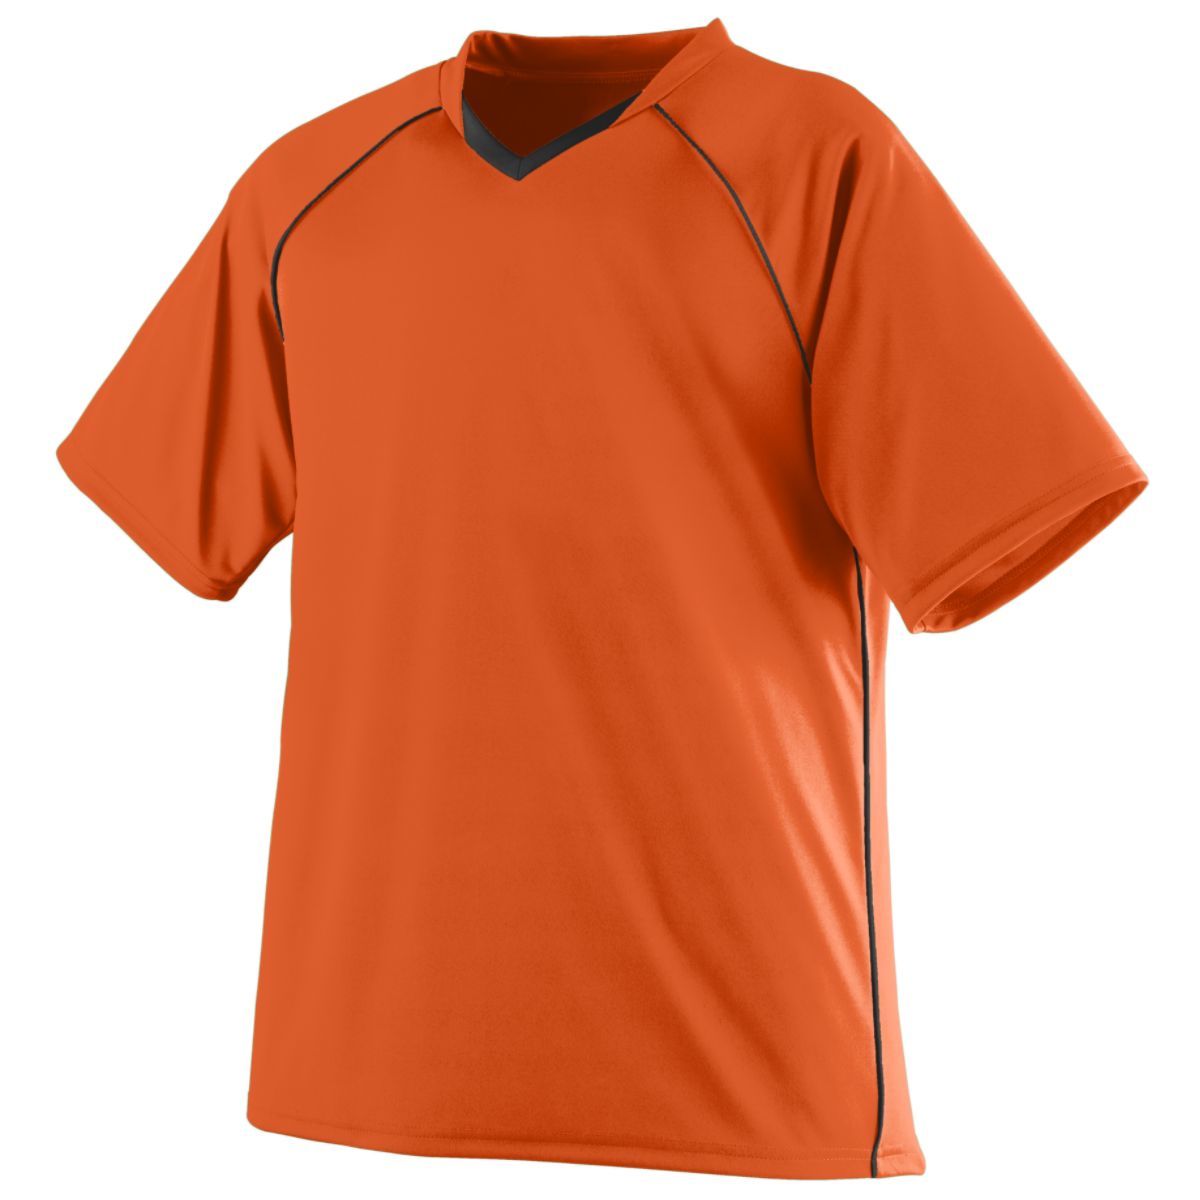 Augusta Sportswear Youth Striker Jersey in Orange/Black  -Part of the Youth, Youth-Jersey, Augusta-Products, Soccer, Shirts, All-Sports-1 product lines at KanaleyCreations.com